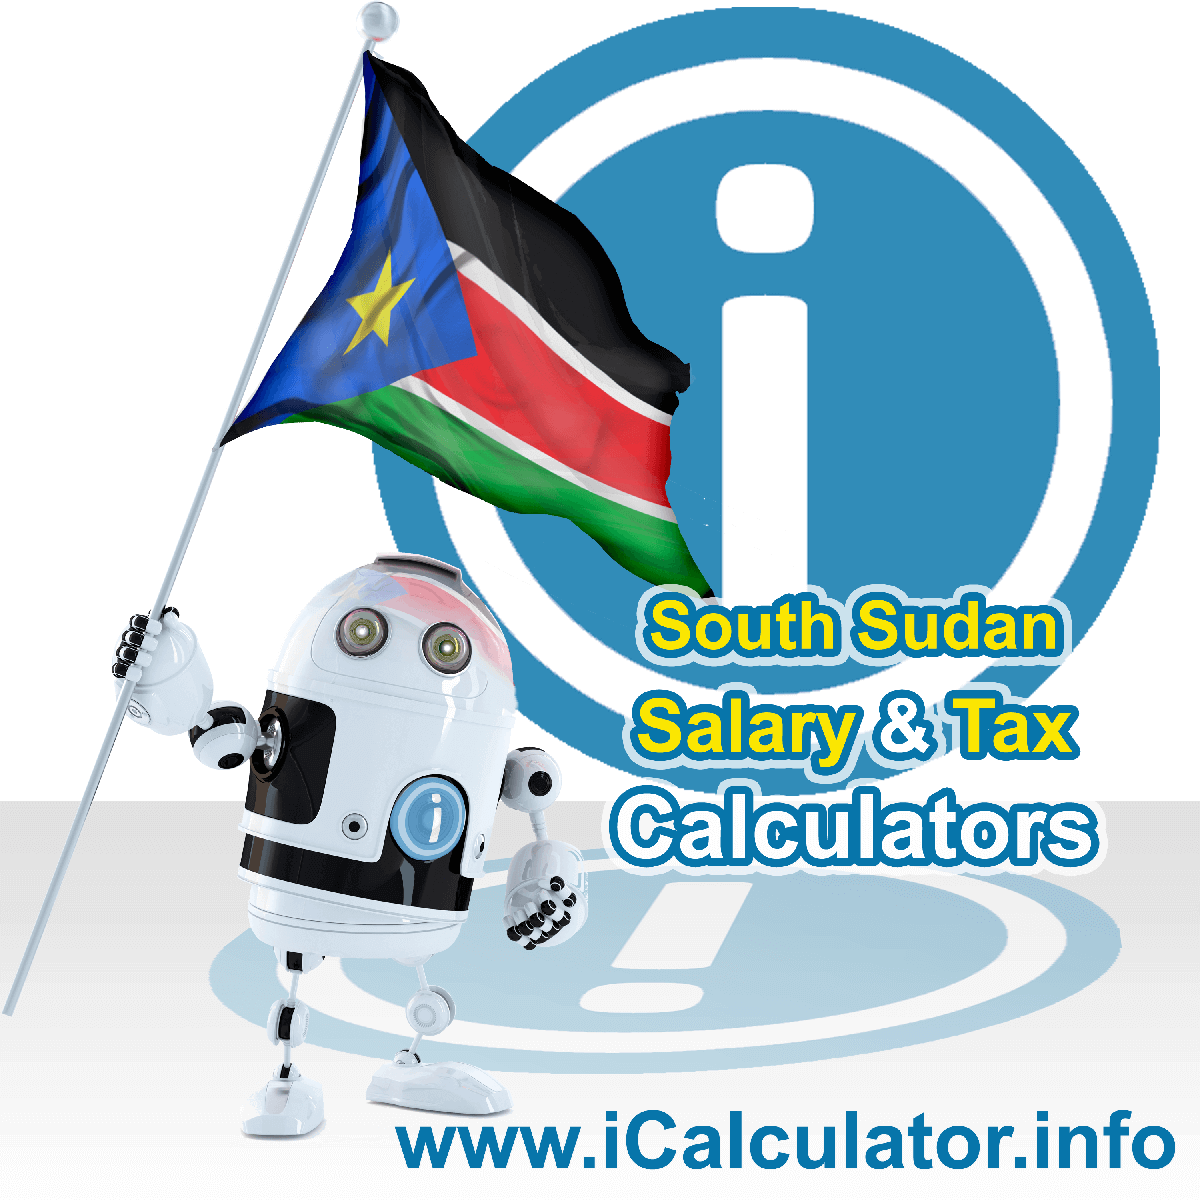 South Sudan Tax Calculator. This image shows the South Sudan flag and information relating to the tax formula for the South Sudan Salary Calculator